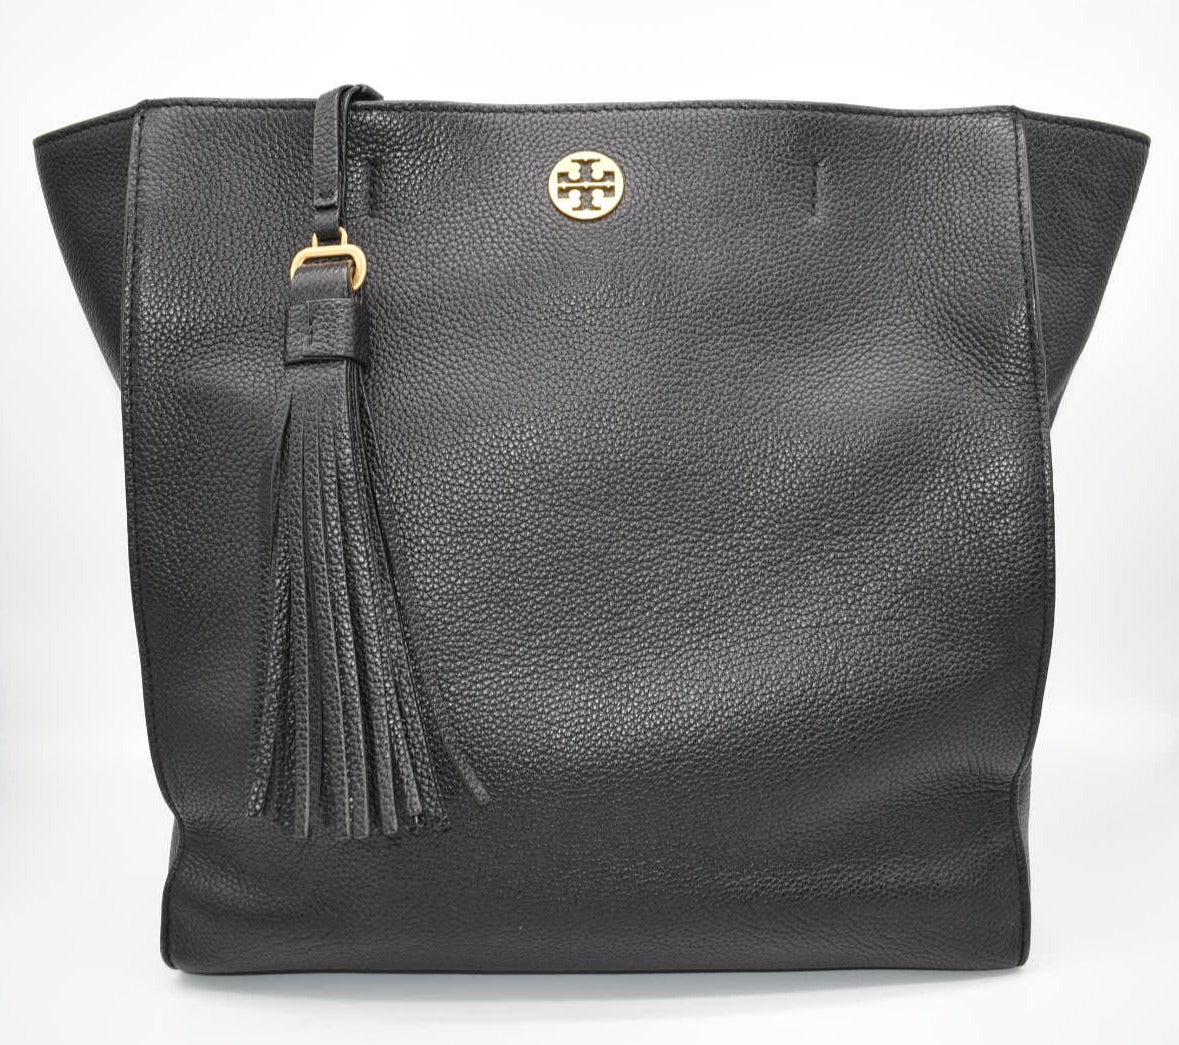 Tory Burch Carter NS Leather Tote Bag